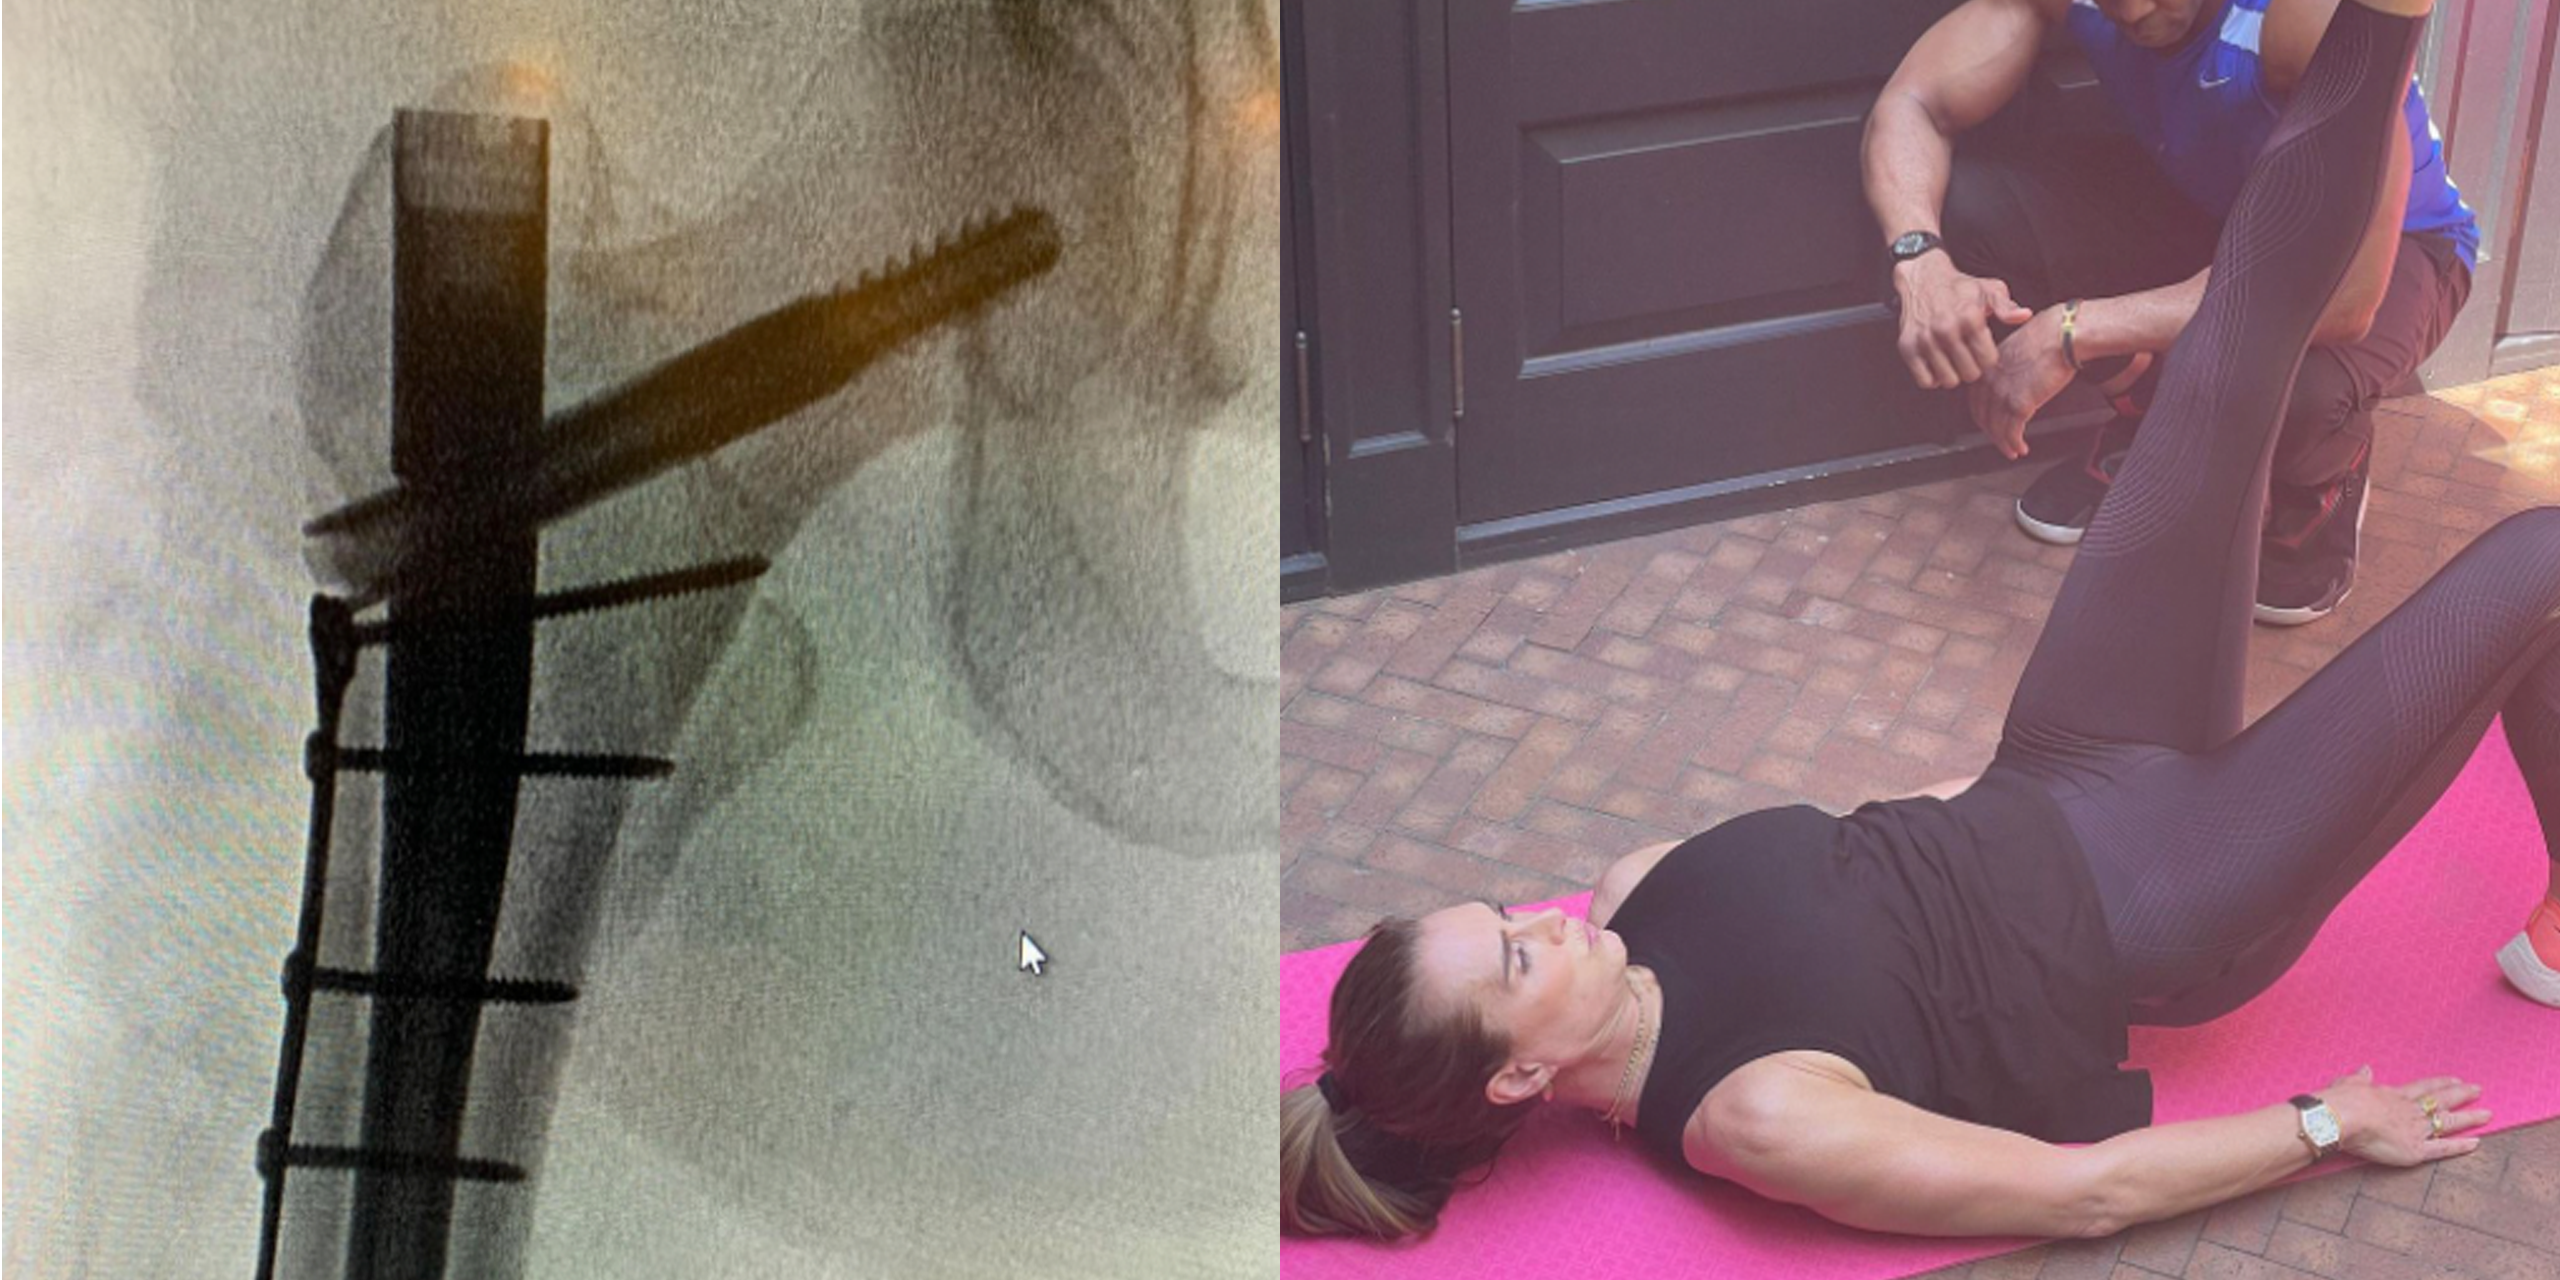 Brooke Shields Shares Post-Surgery X-Ray After Breaking Femur image photo